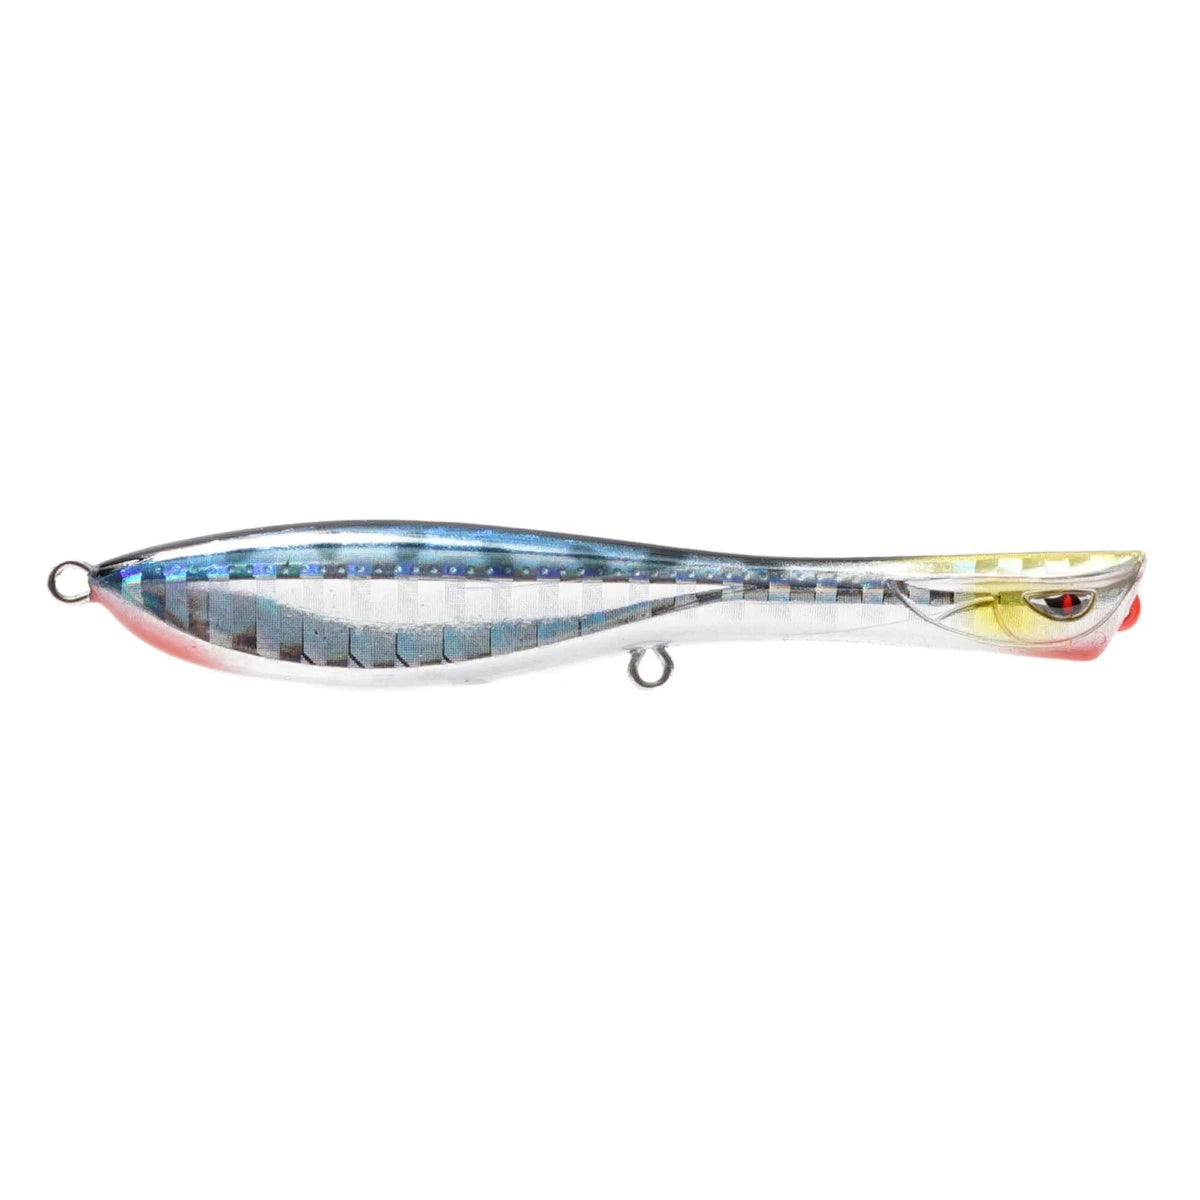 Nomad Design Dartwing Sinking Long Cast 130mm 43g Fishing Lure